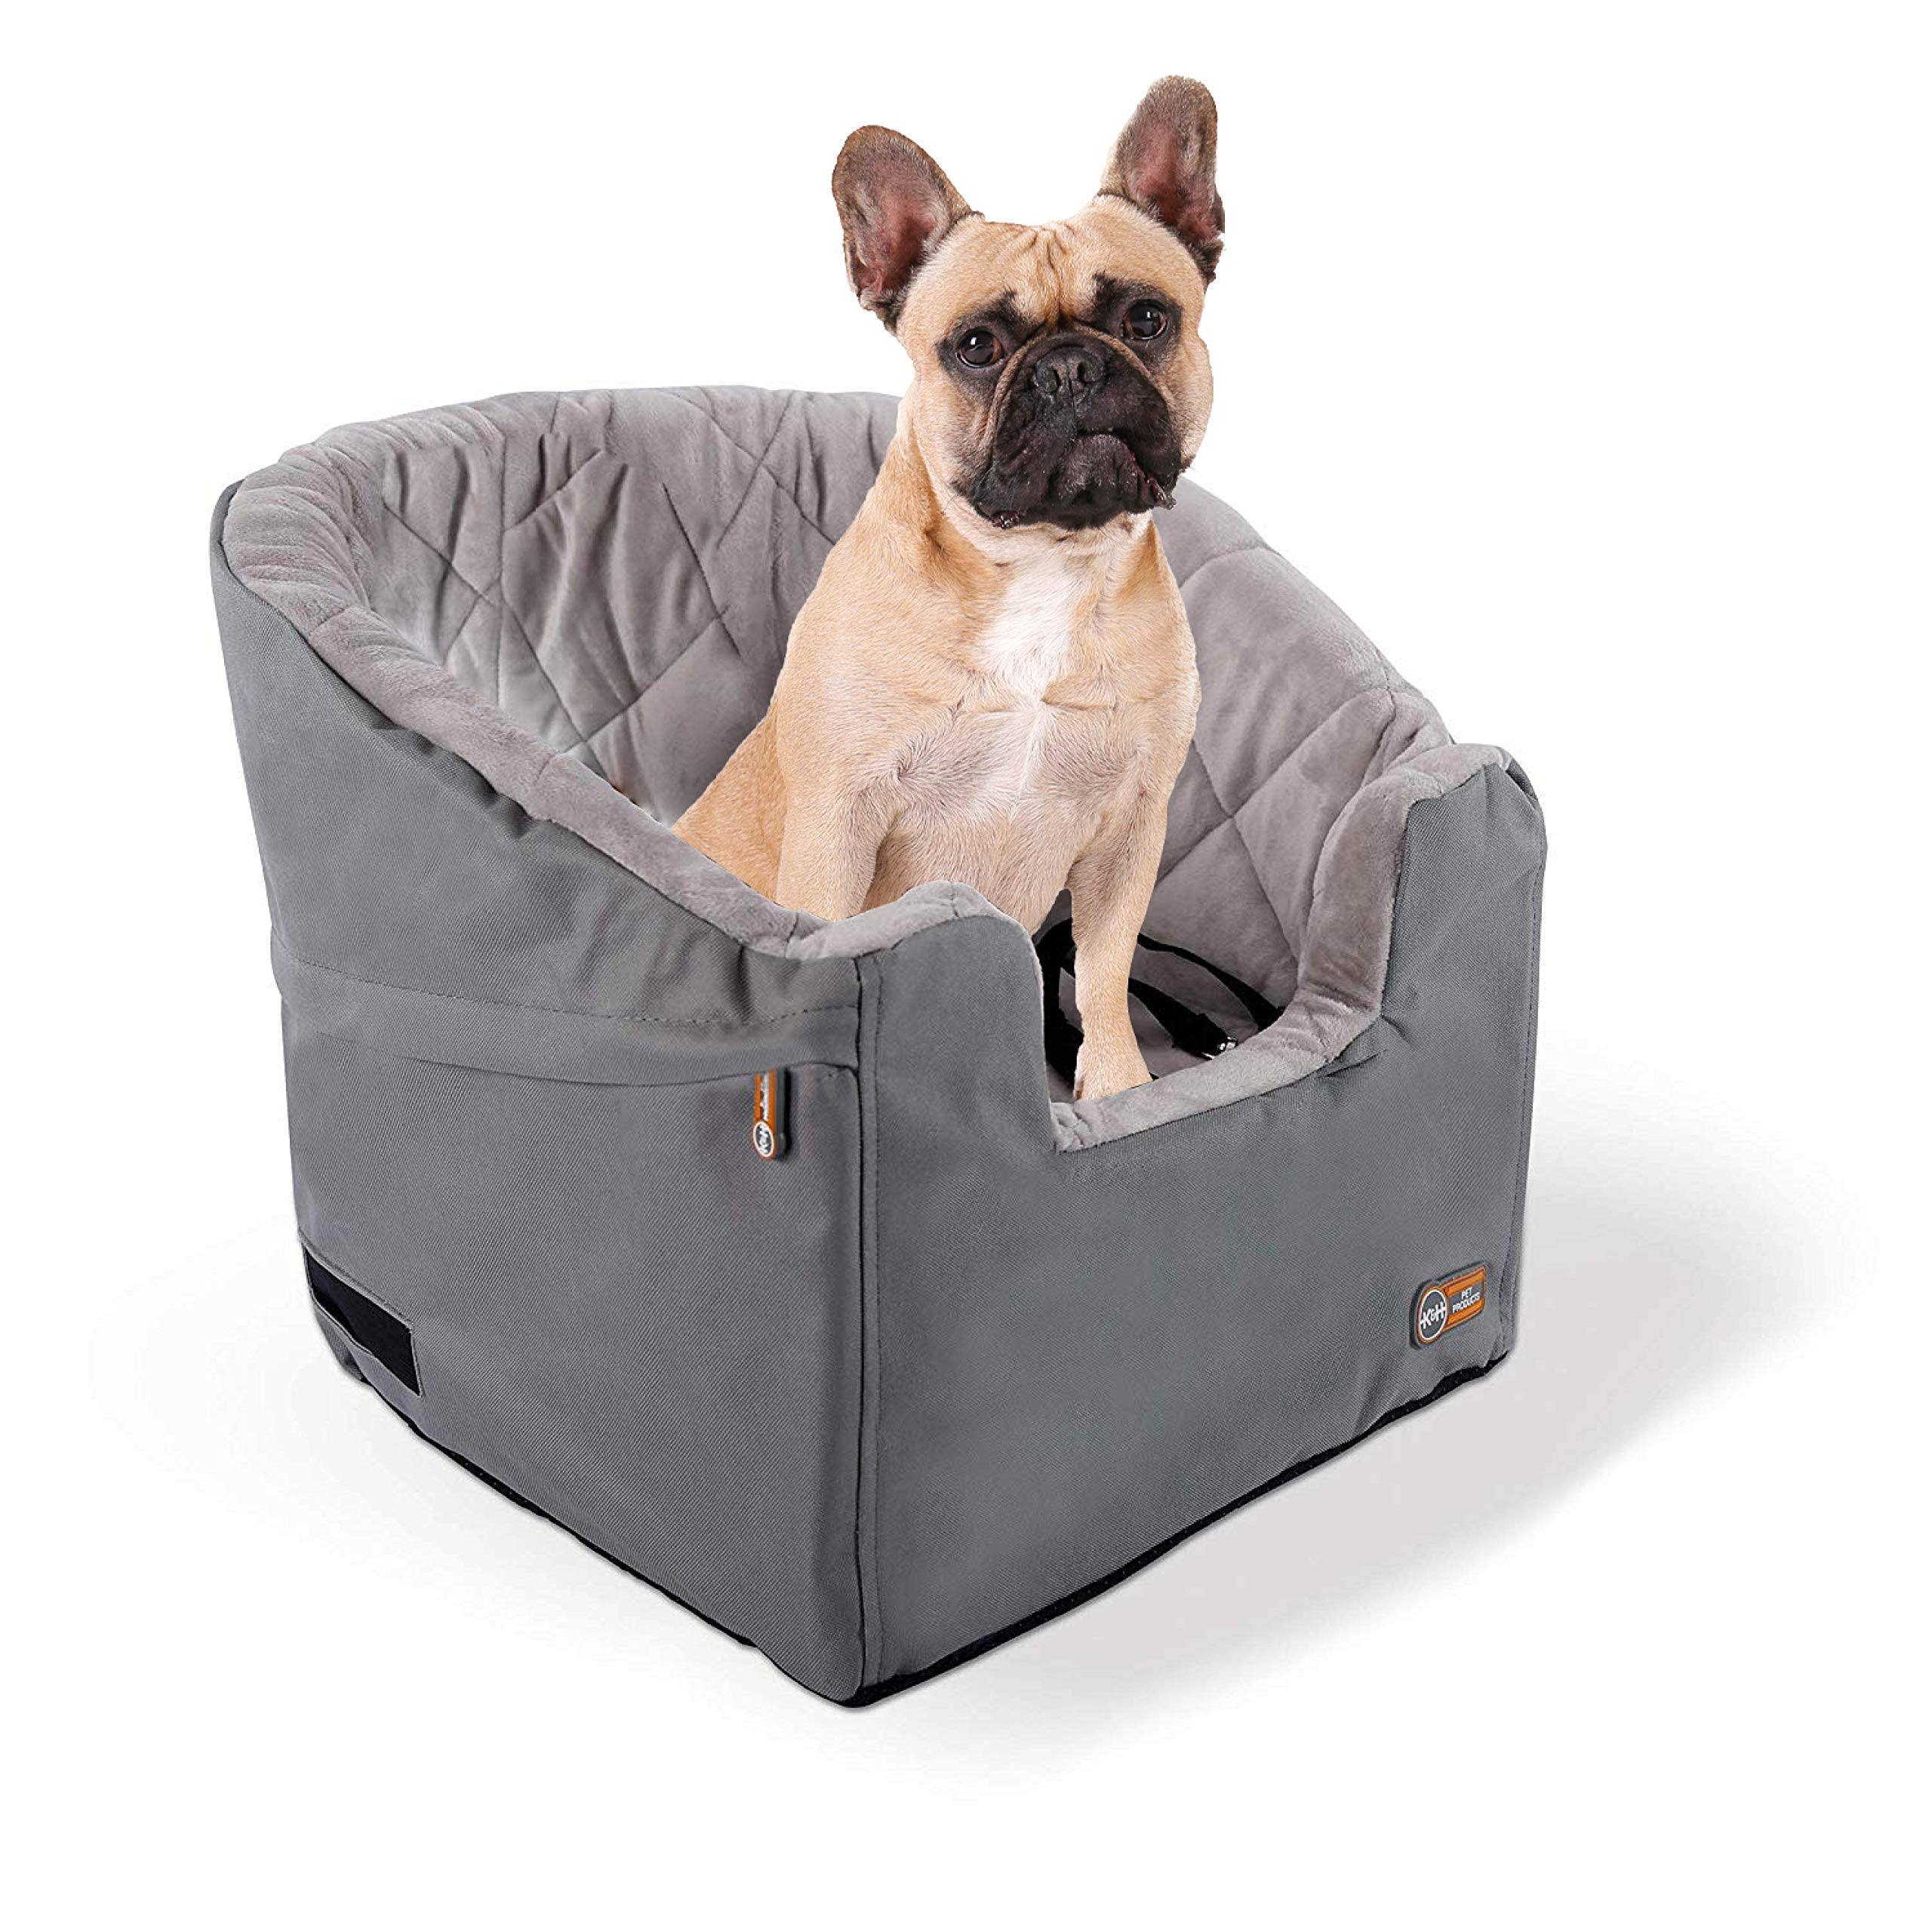 K and H Pet Products Bucket Booster Pet Seat - Small, Gray, 14.5" x 20"